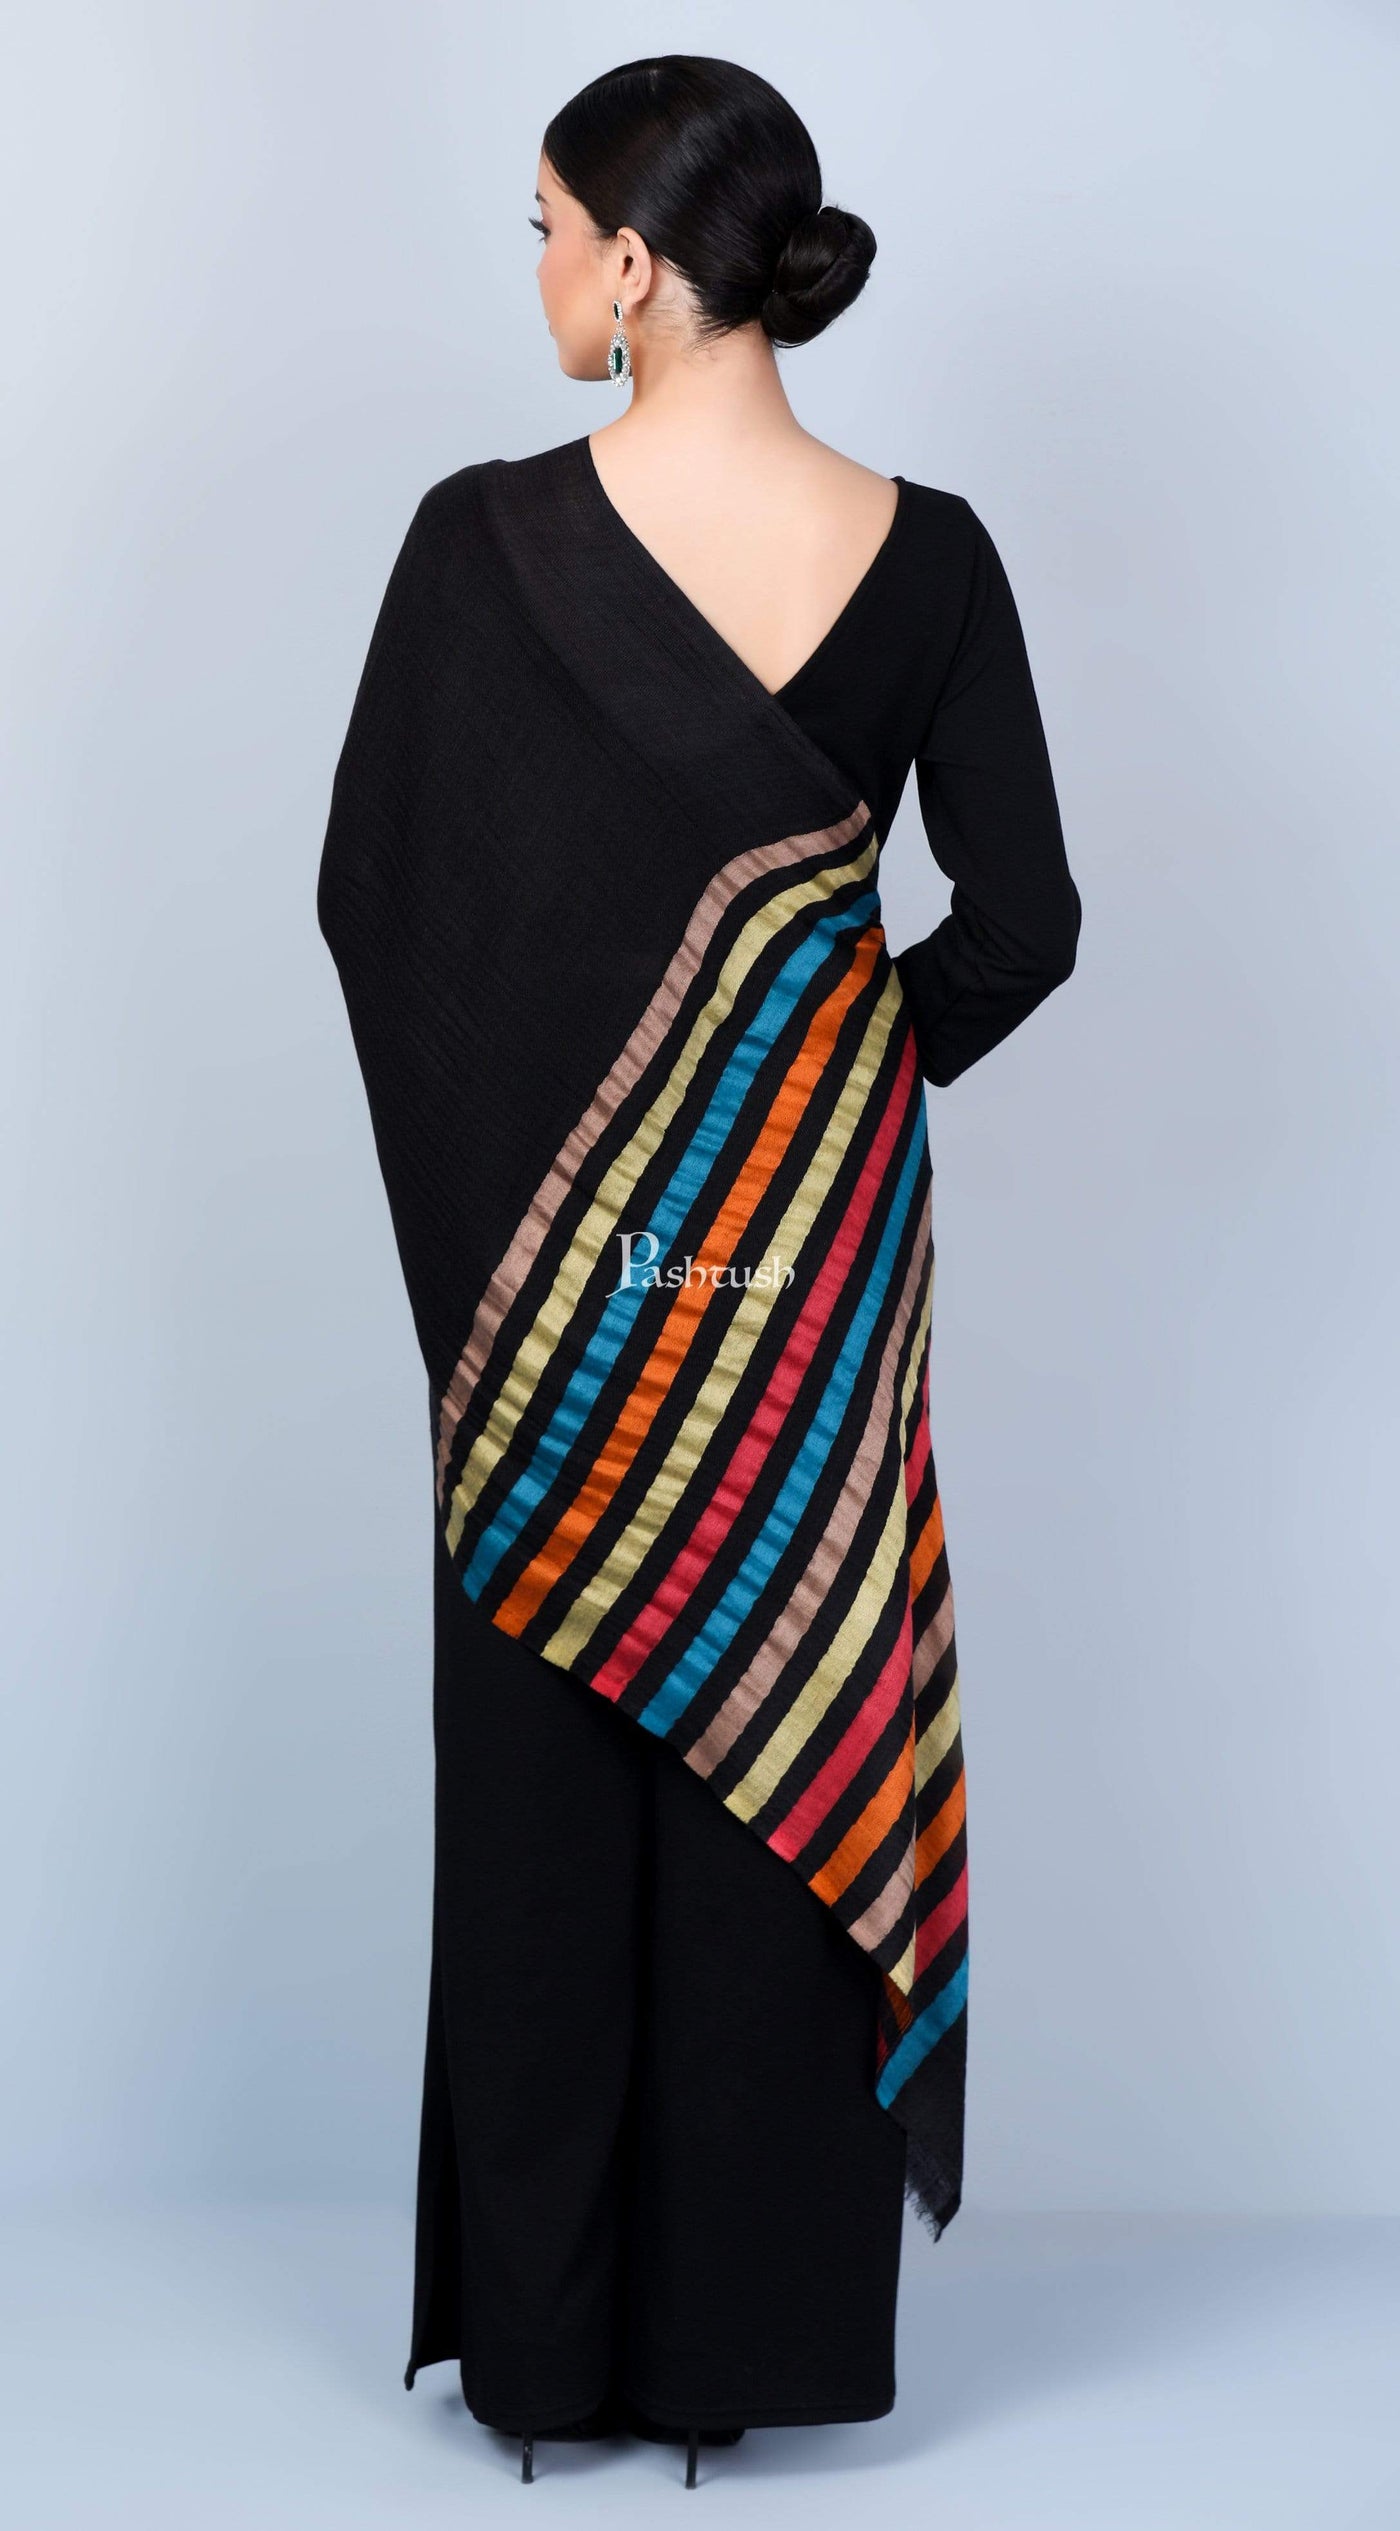 Pashtush Store Stole Pashtush Womens Cashmere and Wool Blended Scarf, with Fluro-Neon Stripes, Rich Black